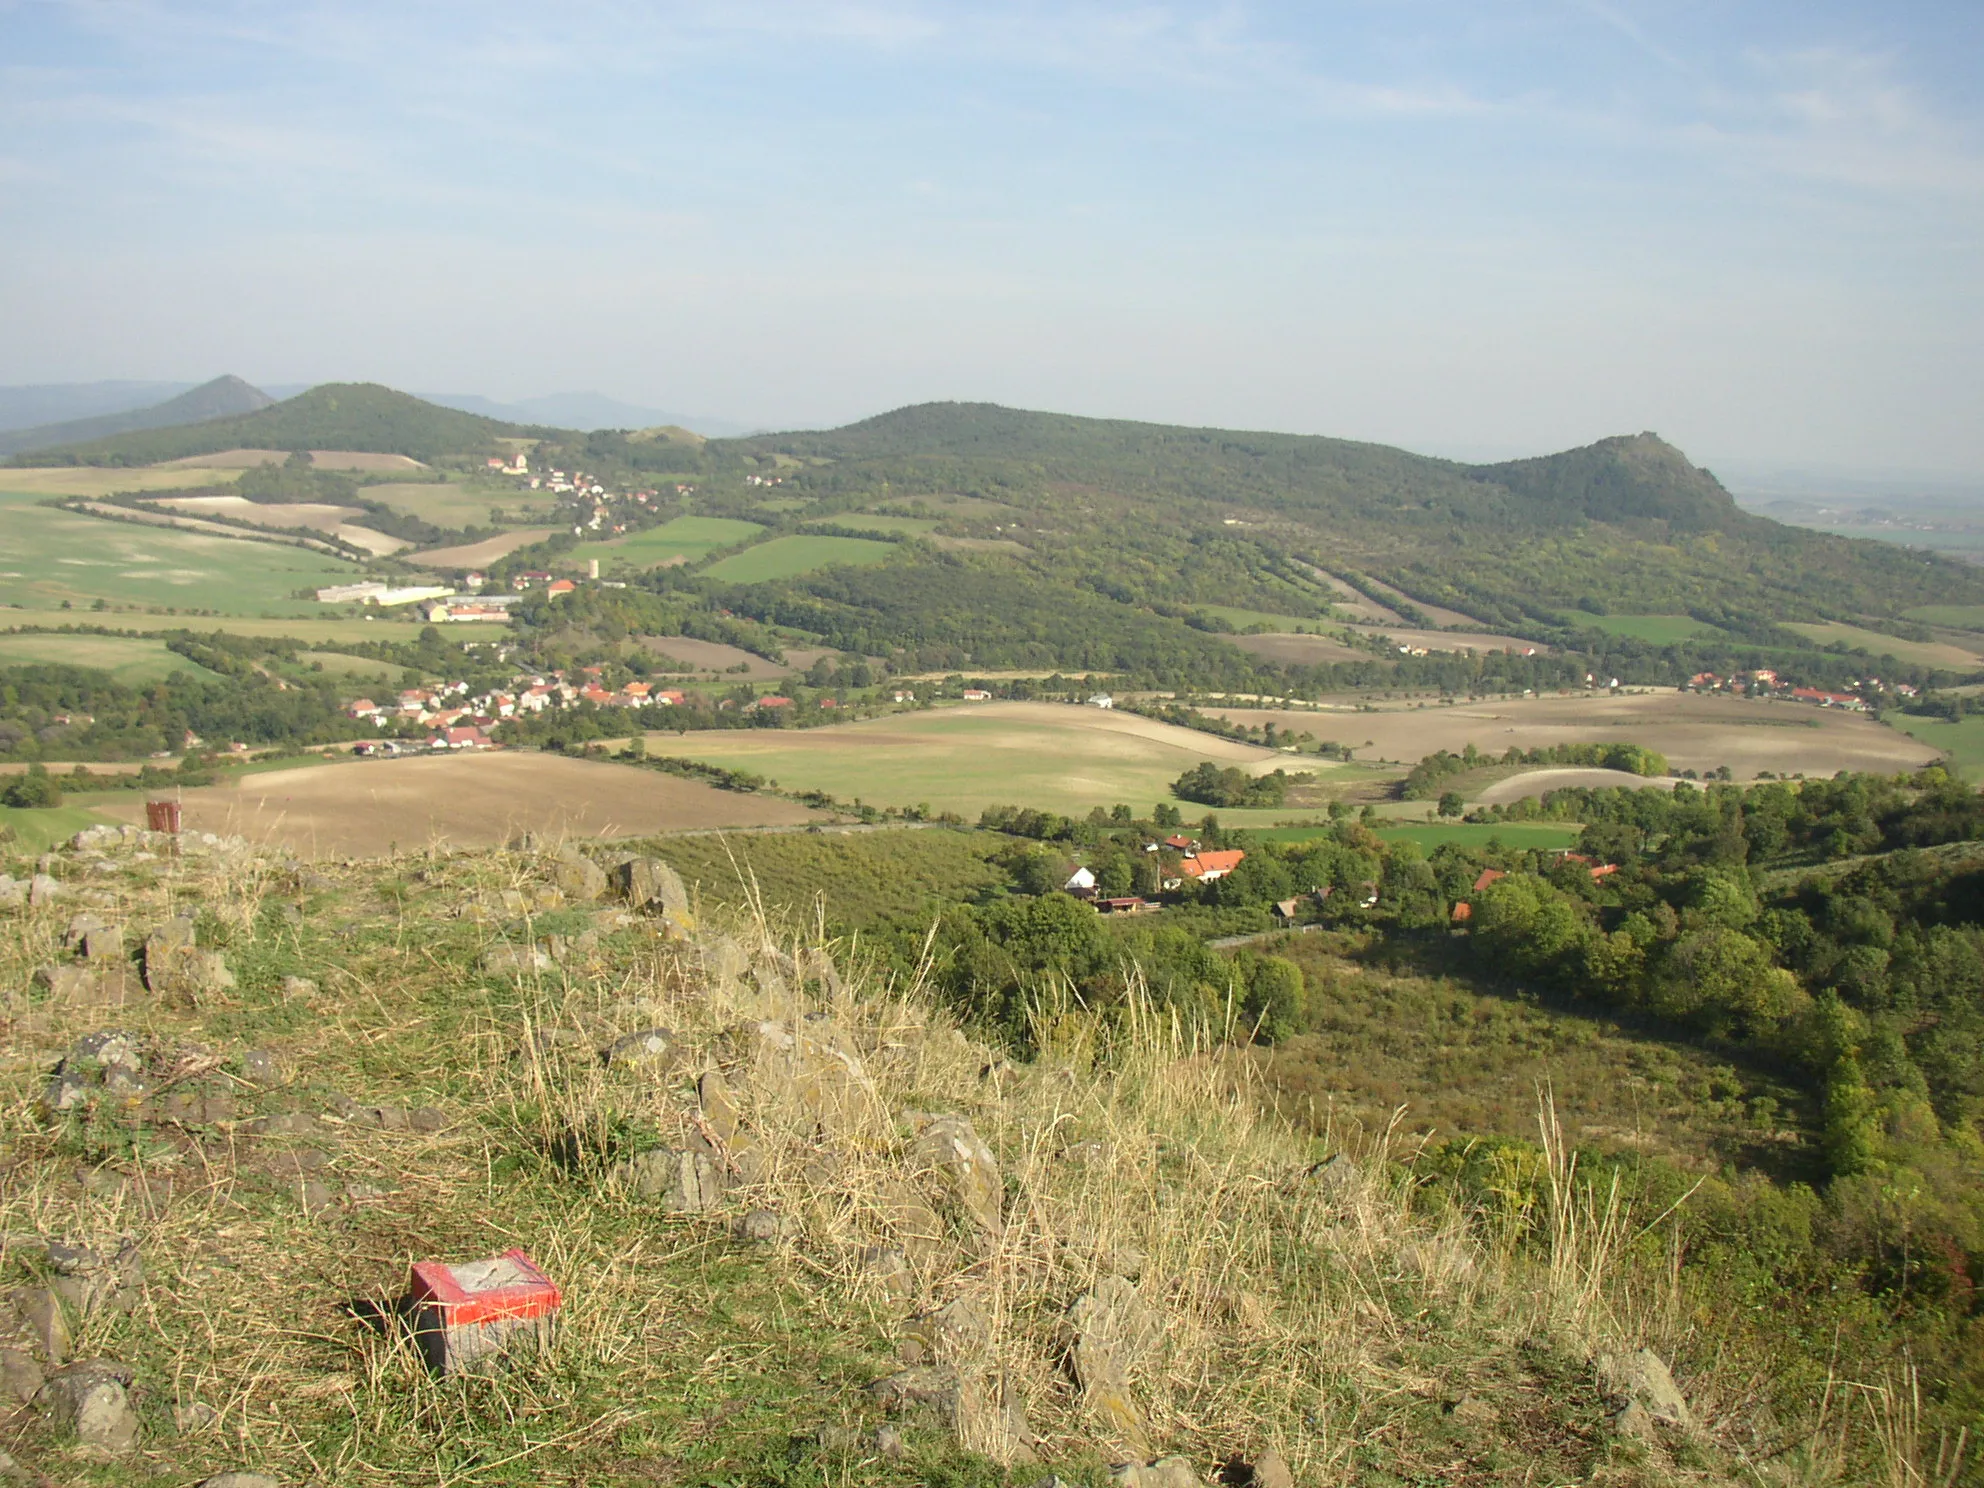 Photo showing: View from summit of Plešivec (477 m) in České středohoří Mts. towards east. In the foreground hamlet of Chrastná with wide valley of the Modla stream beyond. In the valley on the left village of Vlastislav with castle tower and chateau visible. On the right side there lies village of Teplá. Hills on the horizon left to right: Boreč (446 m), Sutomský vrch (505 m),  at centre Jezerka (487 m) and Košťál (aka Košťálov, 481 m) with another castle ruin.